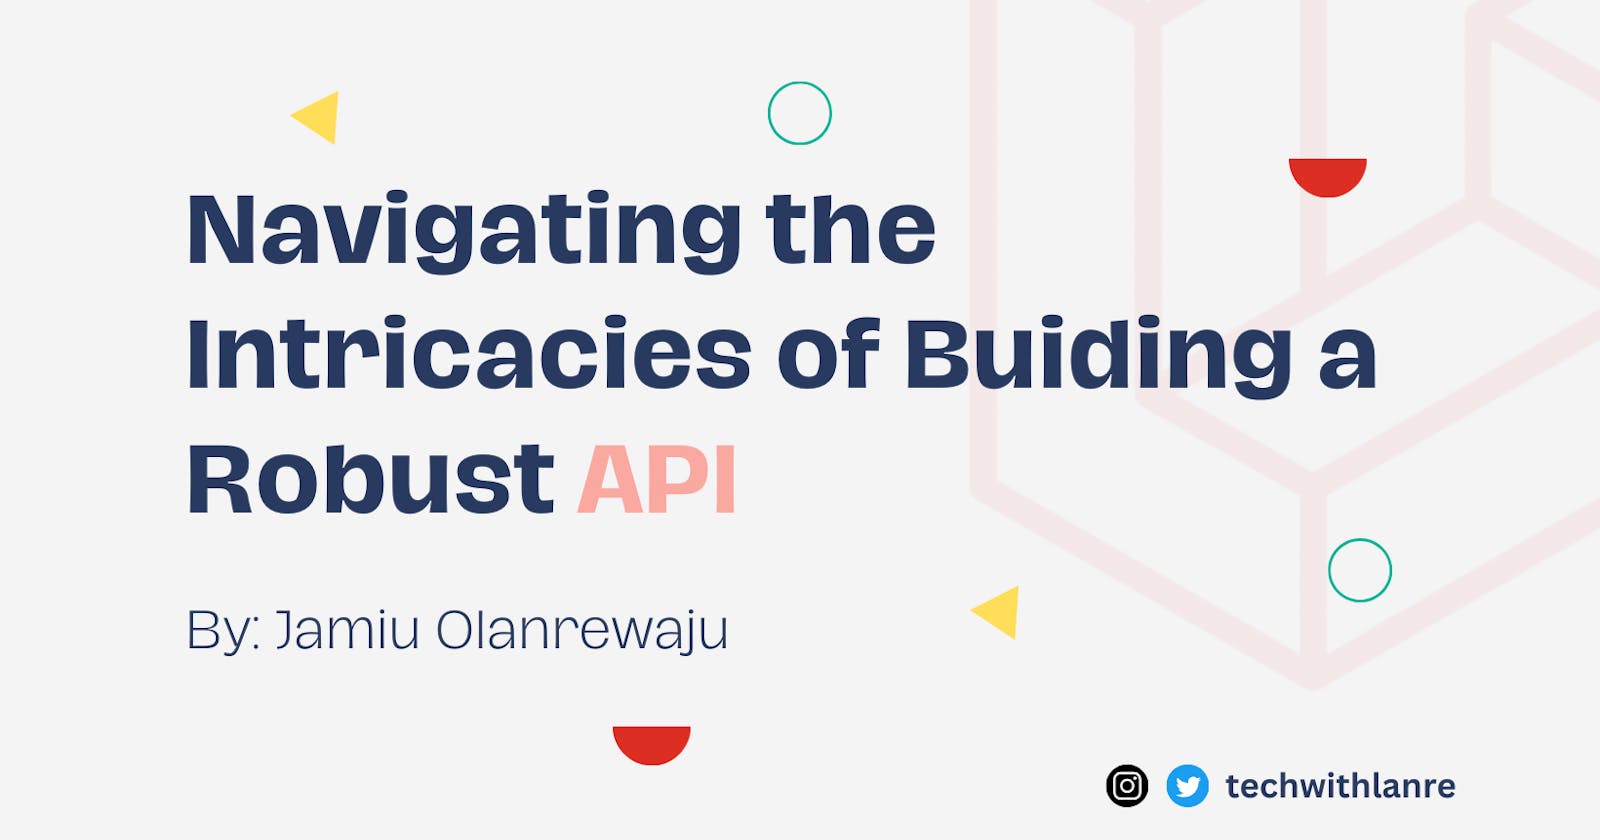 Navigating the Intricacies of Building a Robust API